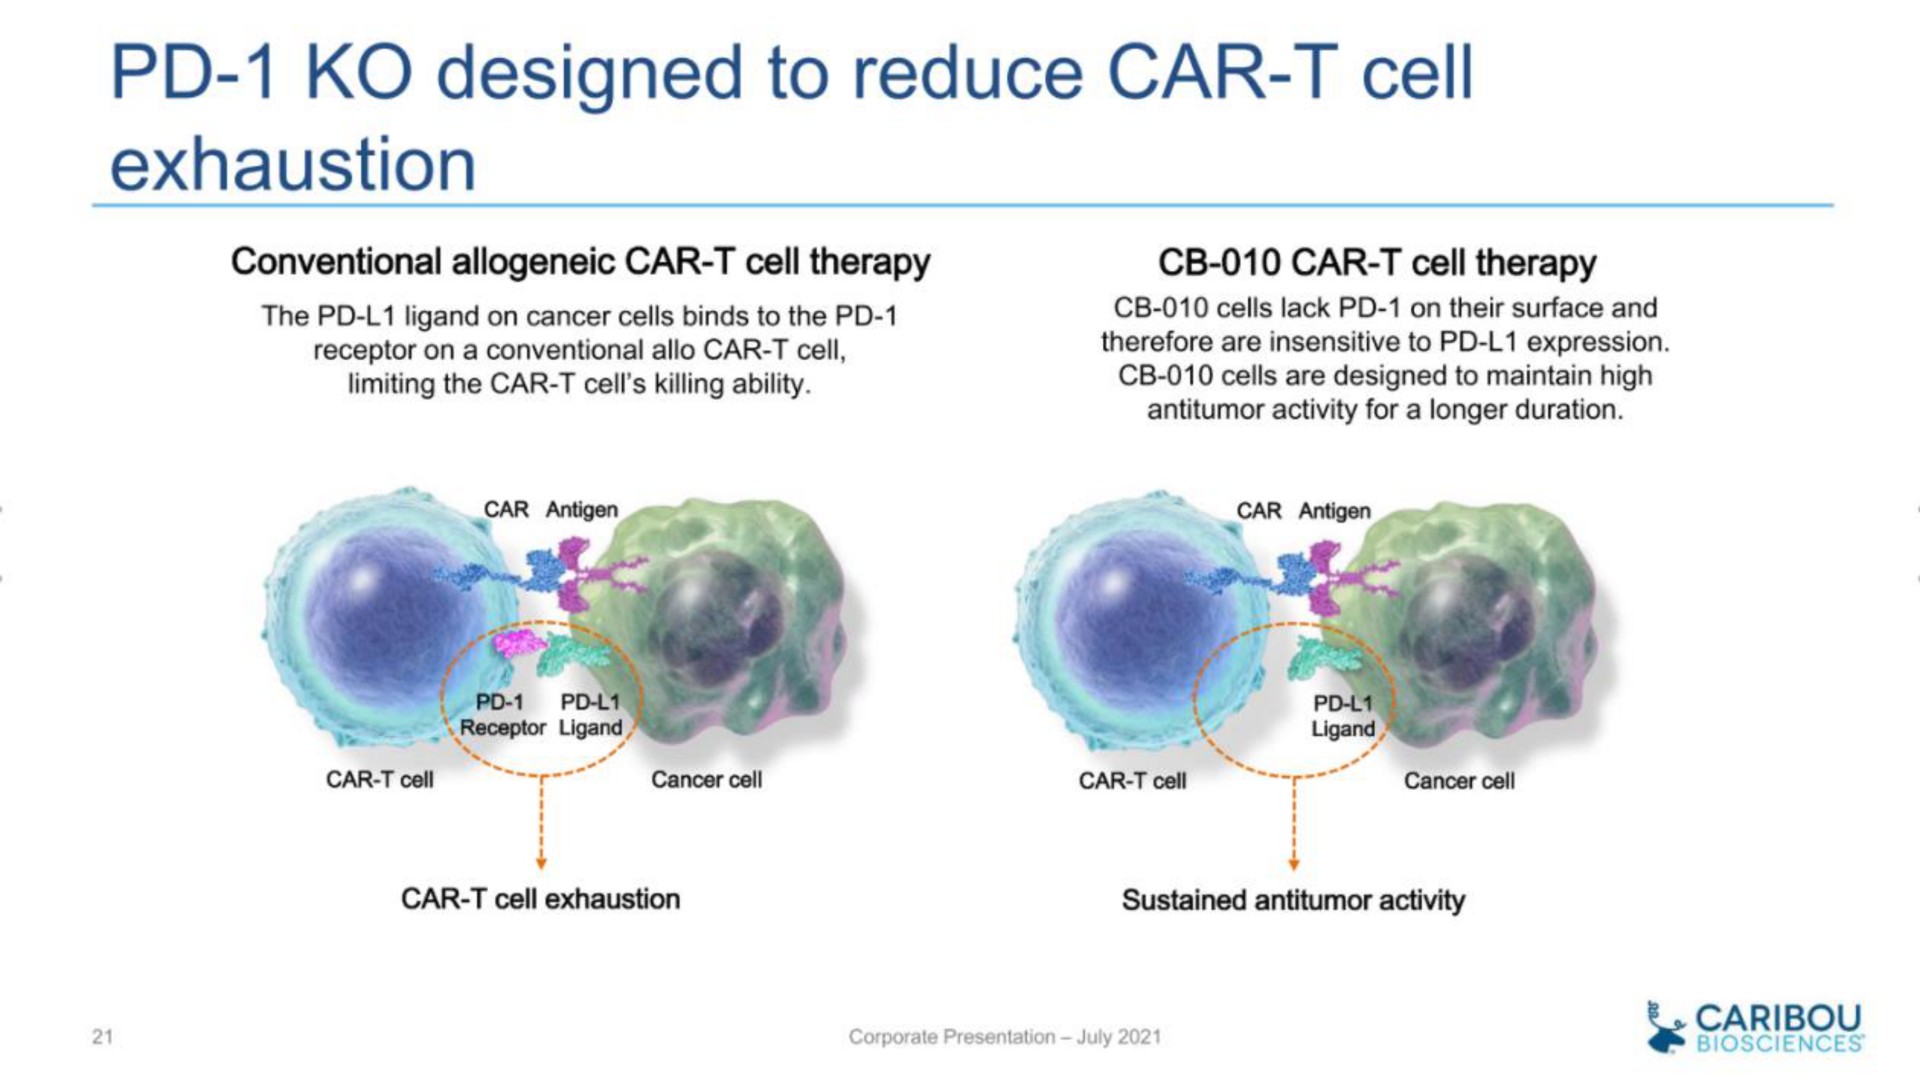 designed to reduce car cell exhaustion | Caribou Biosciences